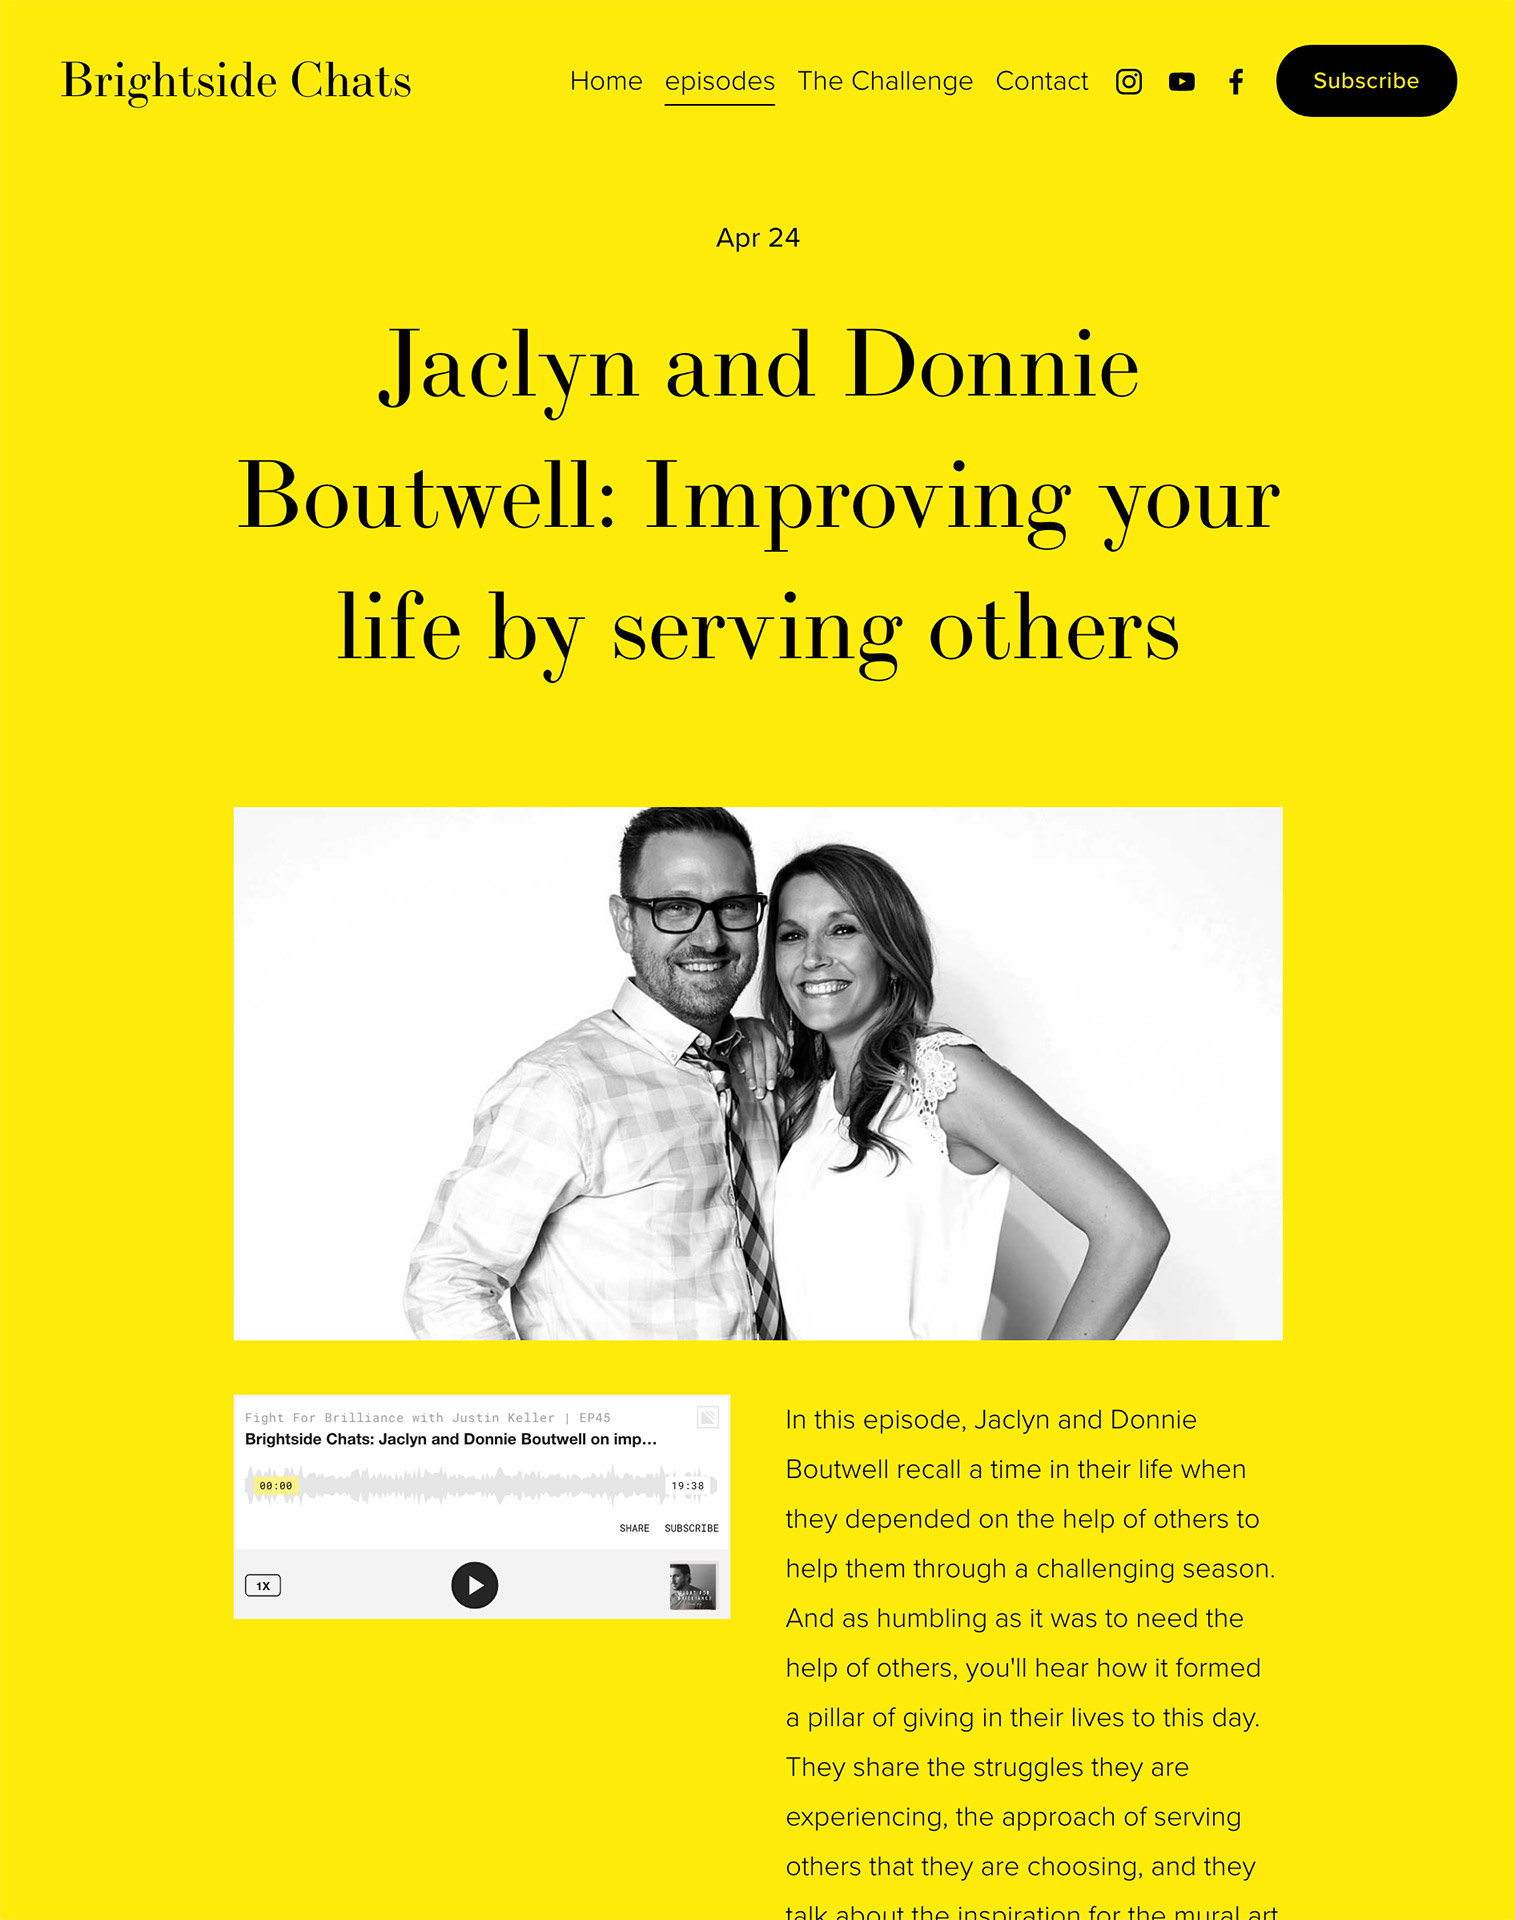 Jaclyn and Donnie Boutwell: Improving Your Life by Serving Others